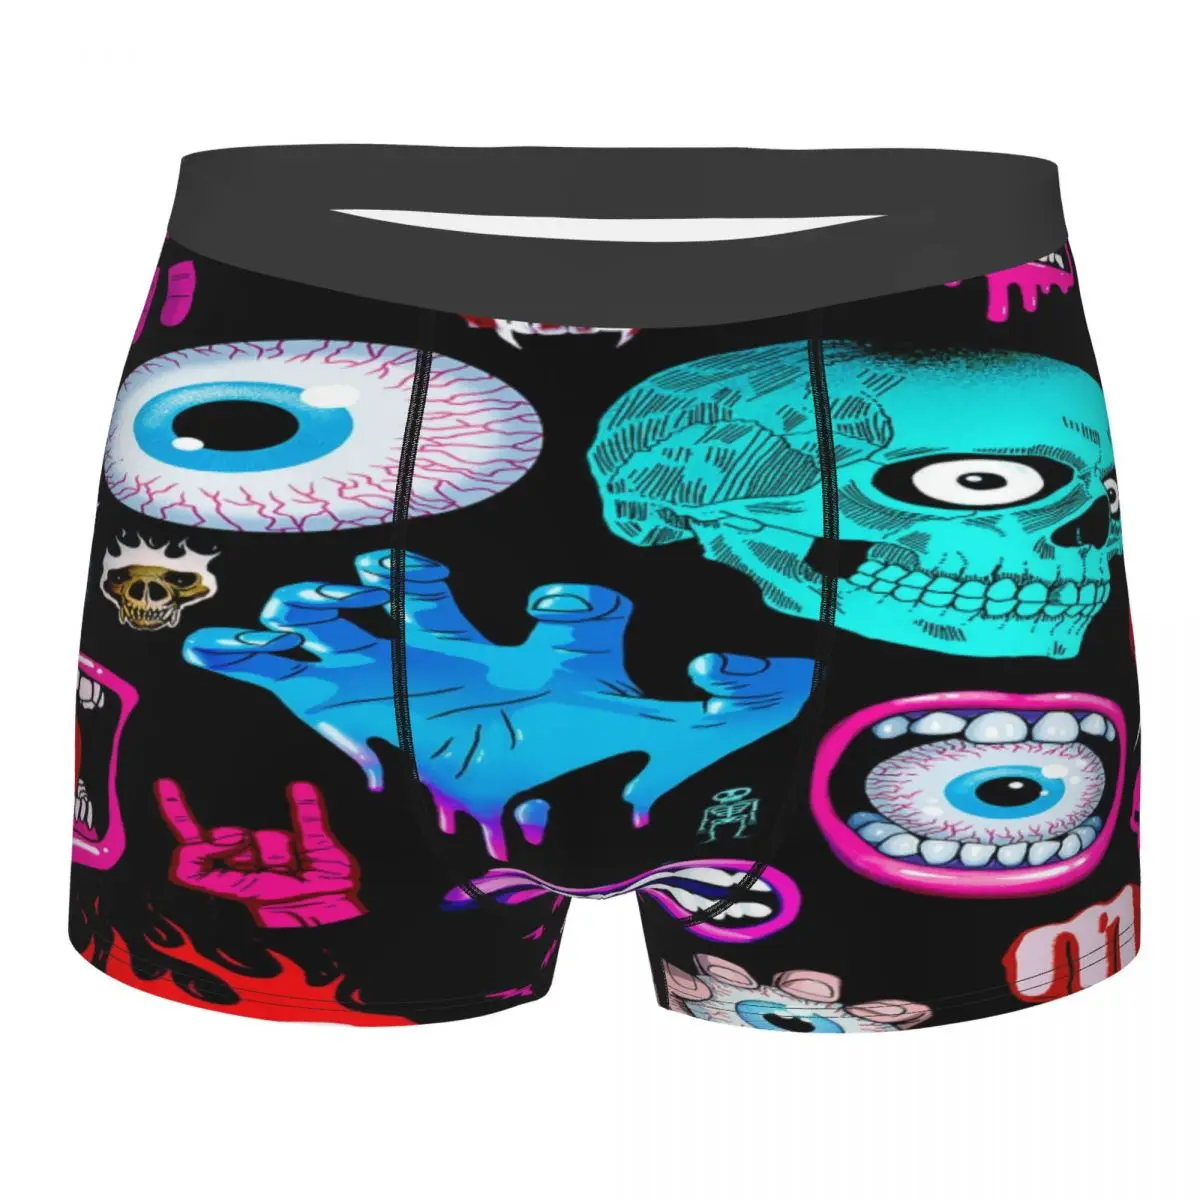 

Zombie Skeleton Skull Tailored Printed Shorts Comfortable Breathable Panties For A Unique Style